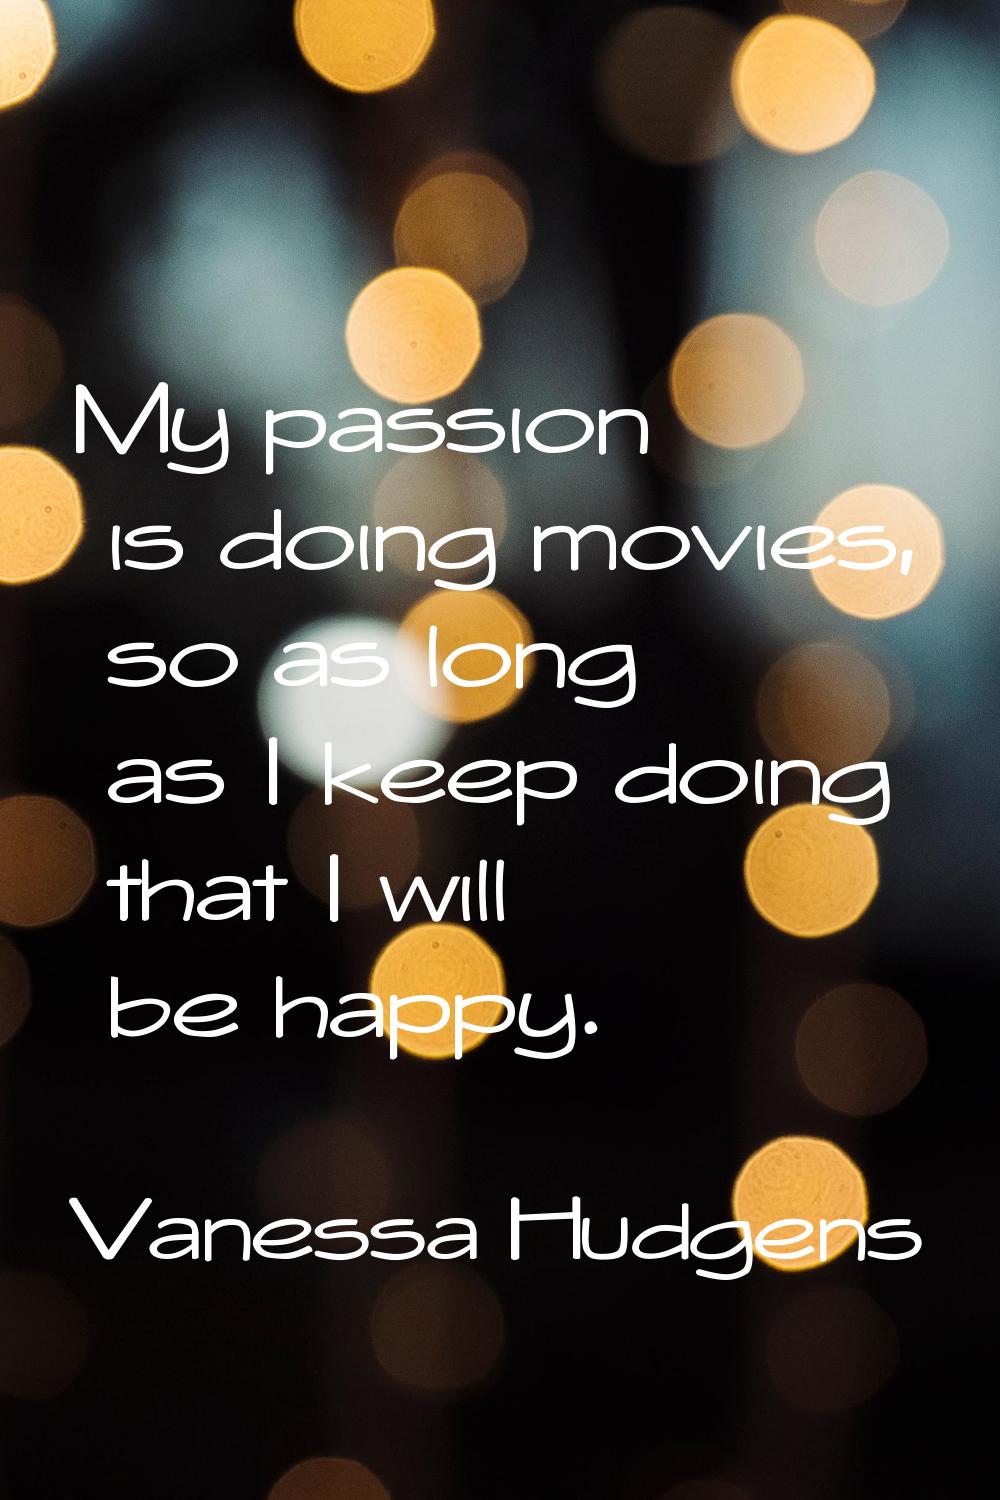 My passion is doing movies, so as long as I keep doing that I will be happy.